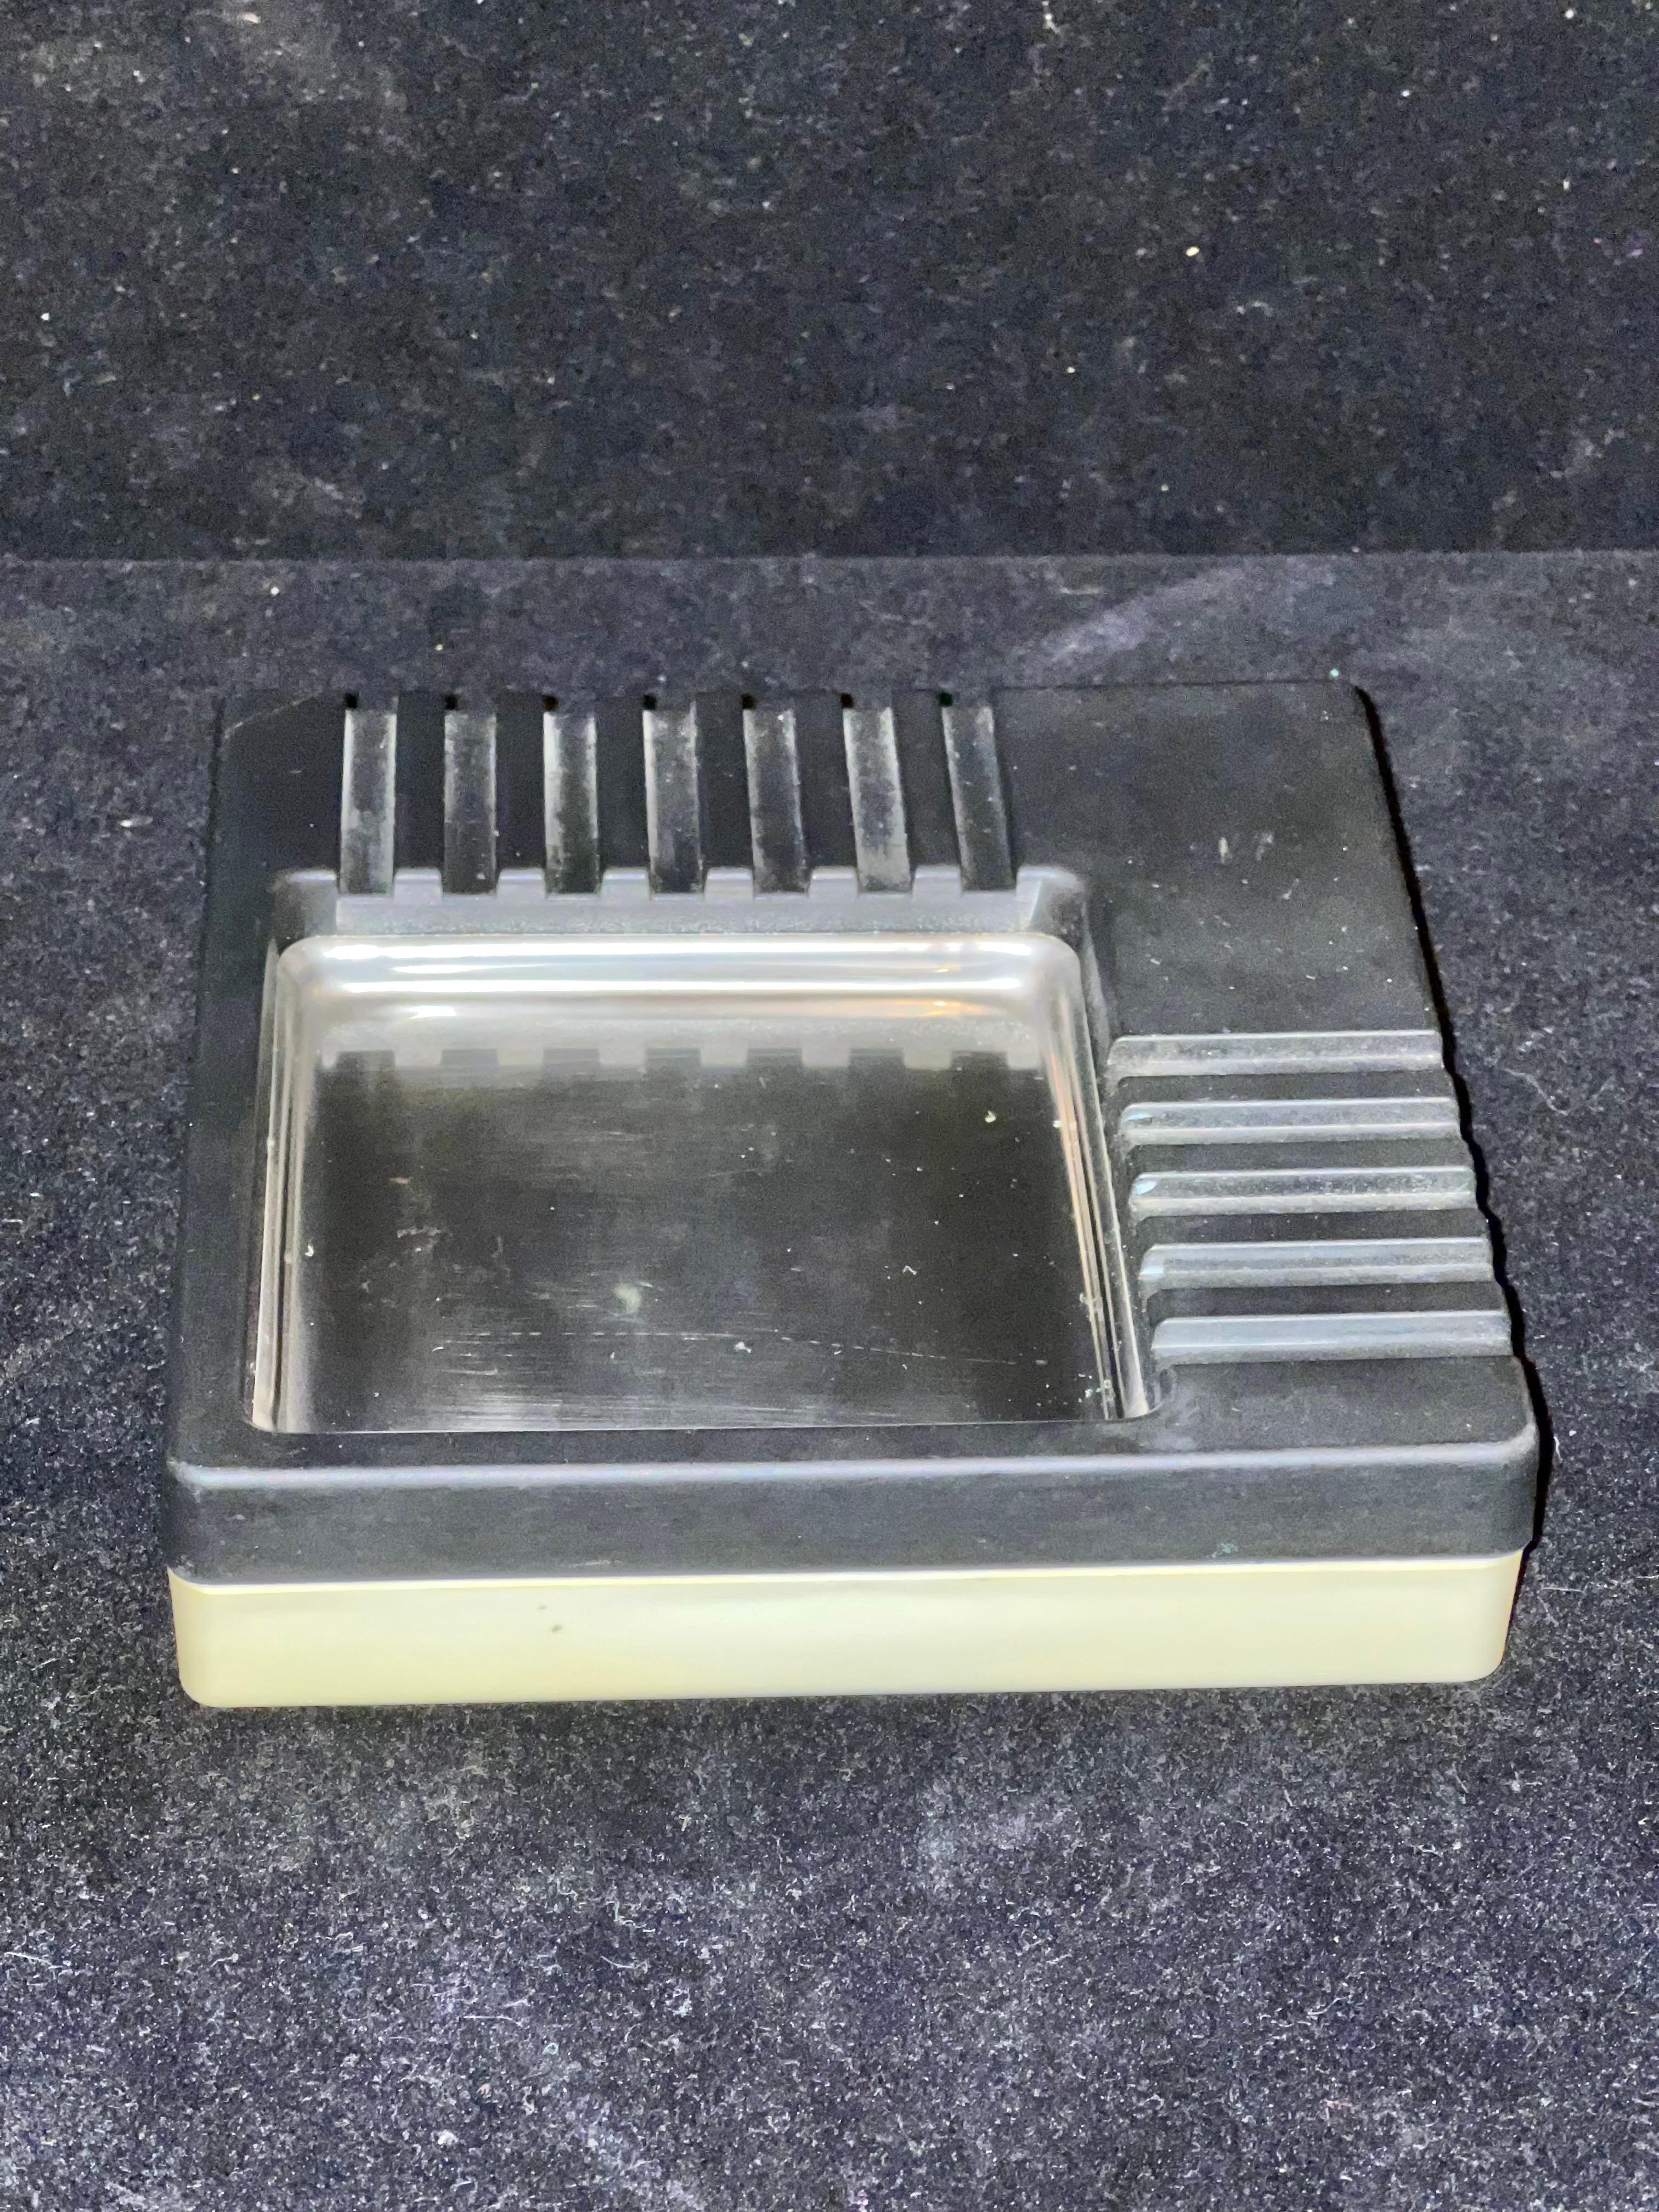 Postmodern Rare Italian Ashtray by Dajna Design in Plastic & Stainless In Good Condition For Sale In San Diego, CA